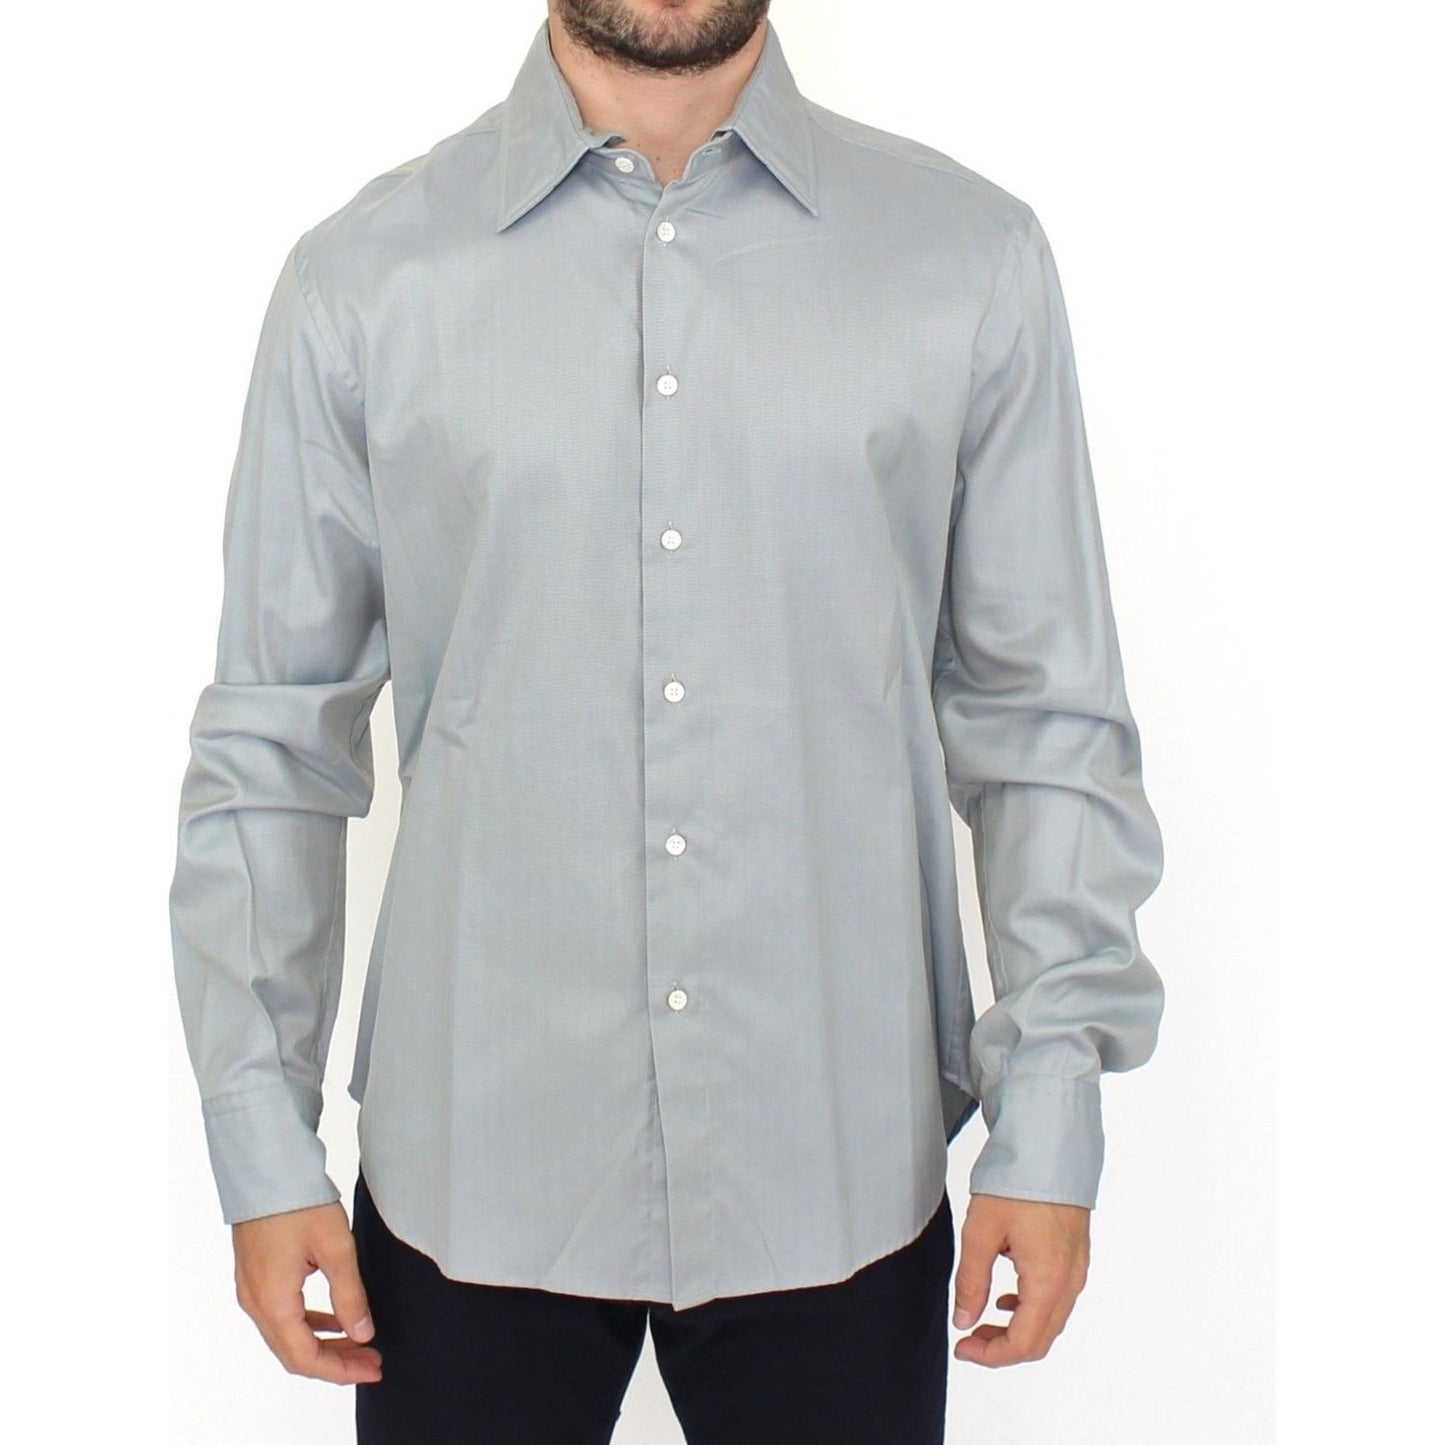 Ermanno Scervino Elegance Unleashed Gray Casual Button-Front Shirt gray-cotton-long-sleeve-casual-shirt-top 37513-gray-cotton-long-sleeve-casual-shirt-top.jpg